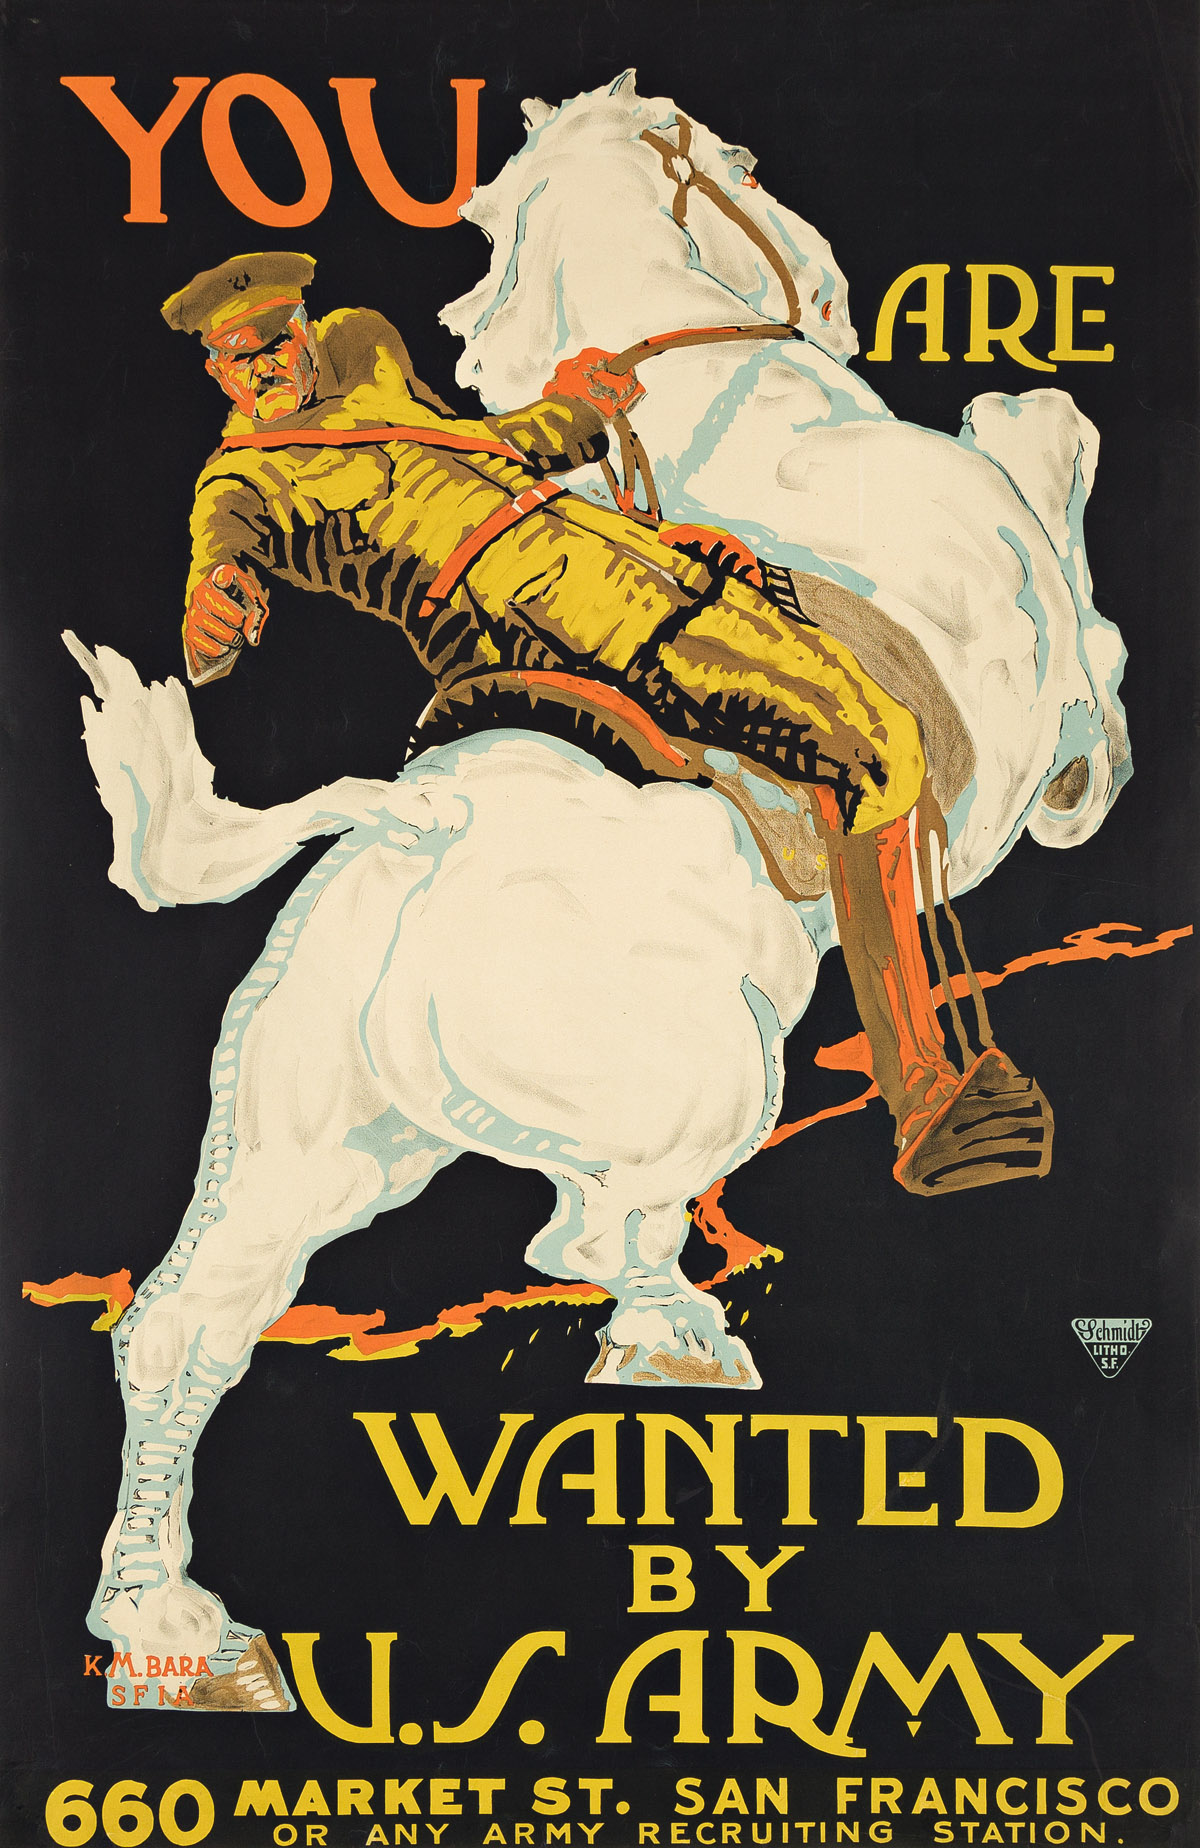 K.M. BARA (DATES UNKNOWN).  YOU ARE WANTED BY U.S. ARMY. Circa 1918. 41¼x26¾ inches, 104¾x68 cm. Schmidt Litho., San Francisco.